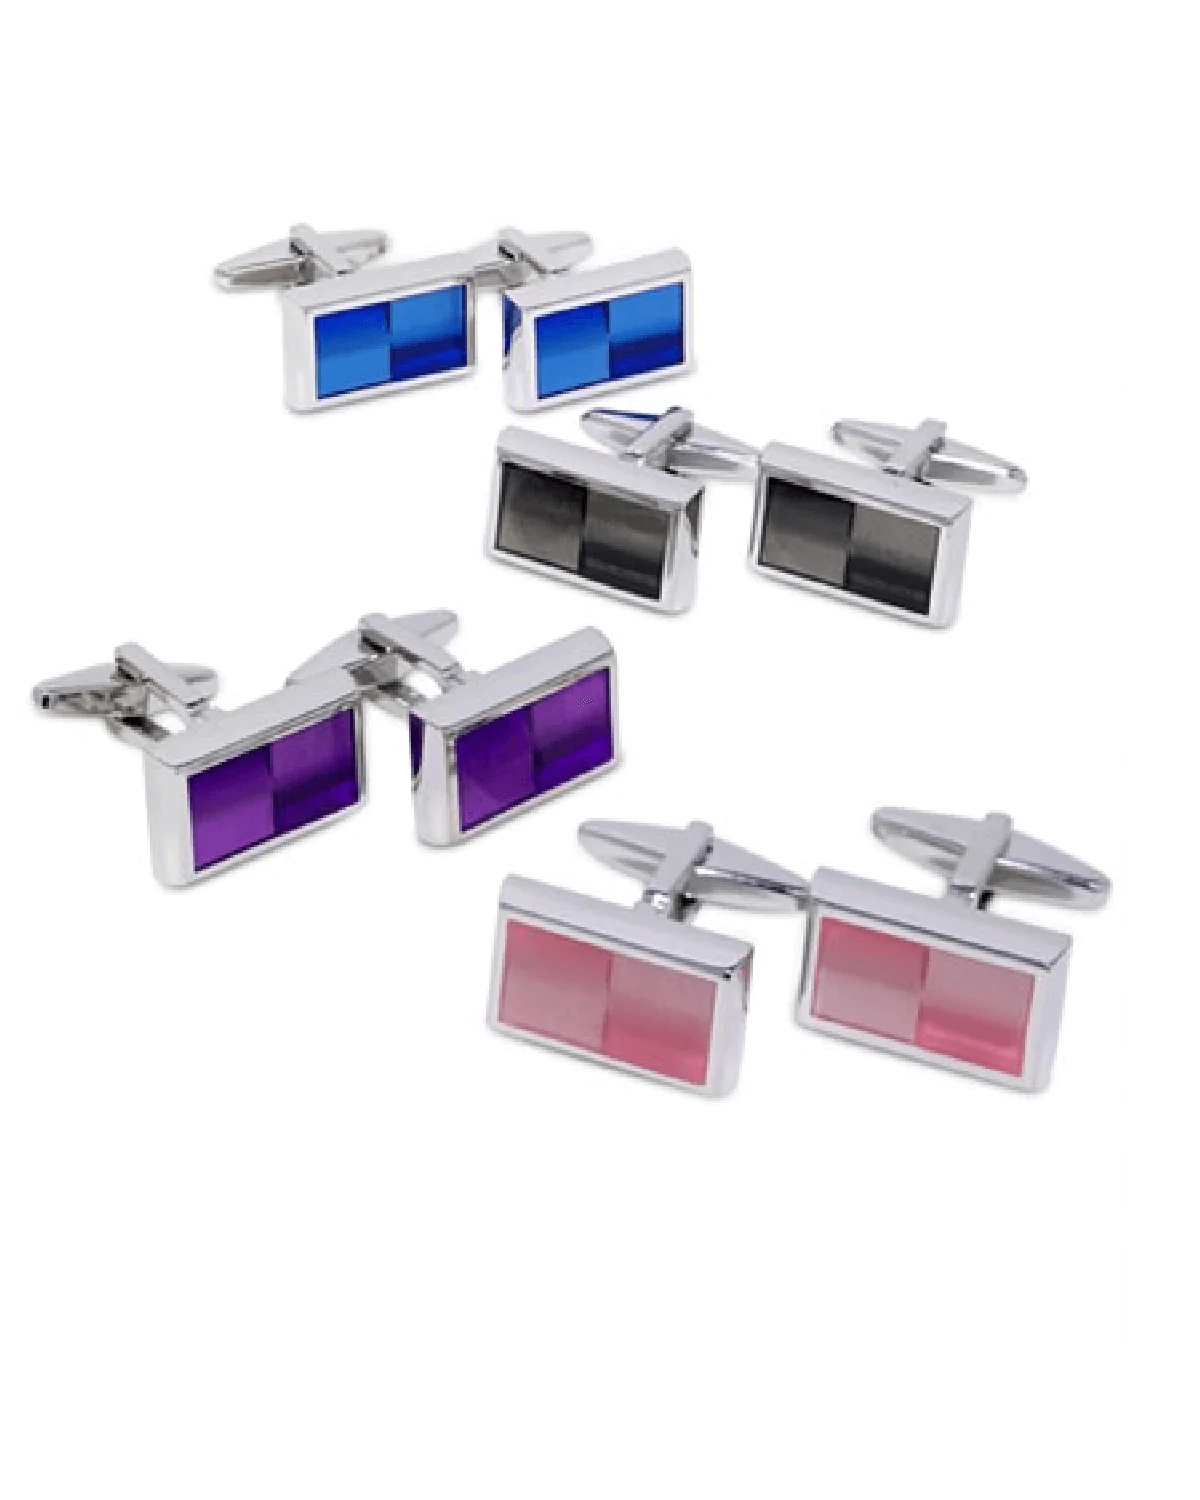 Kenneth Cole Reaction Cufflinks, Colored Ombre Enamel Cufflinks Boxed Set